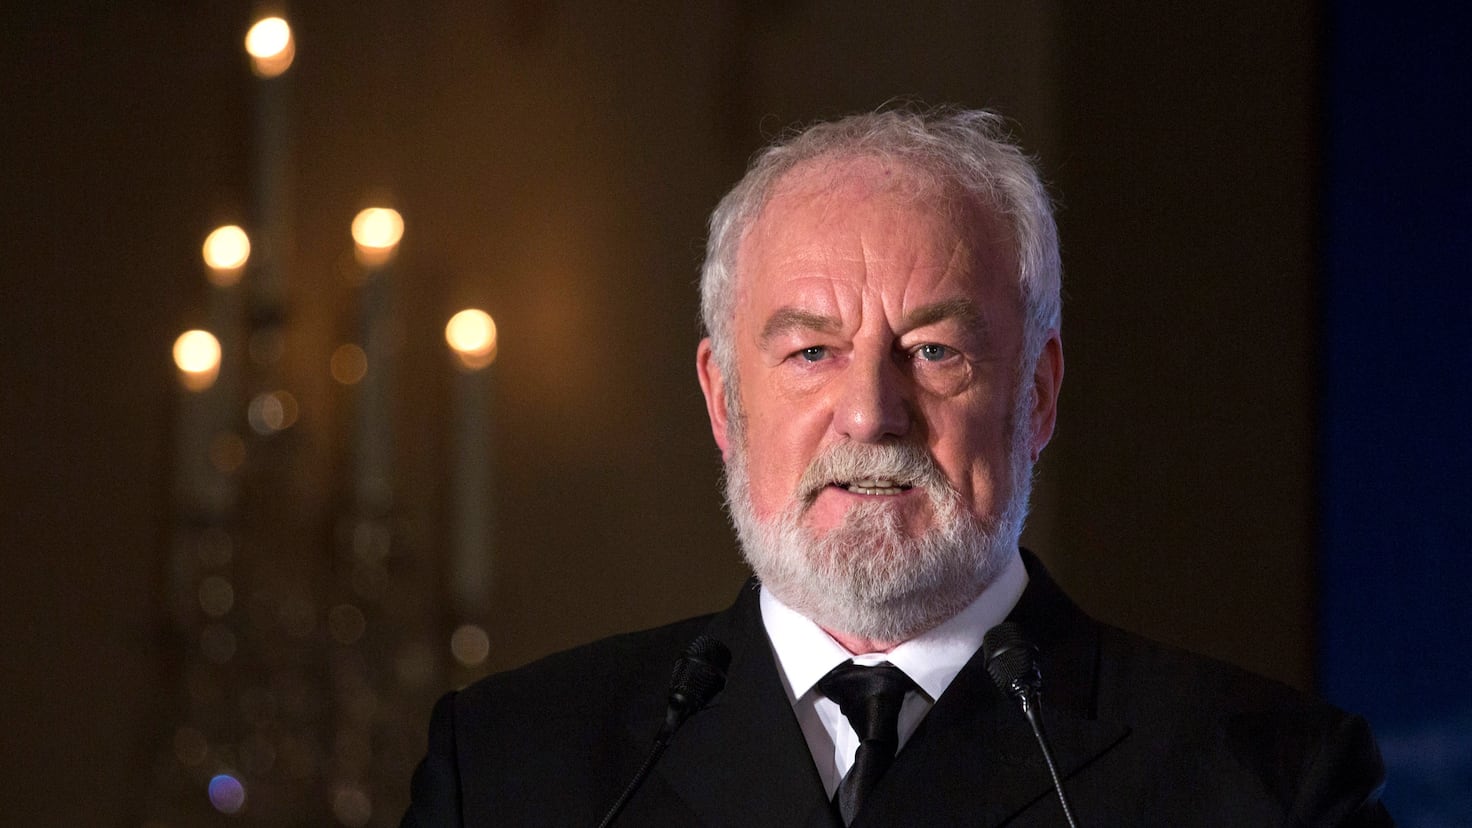 Bernard Hill, from Titanic and The Lord of the Rings, dies at 79
